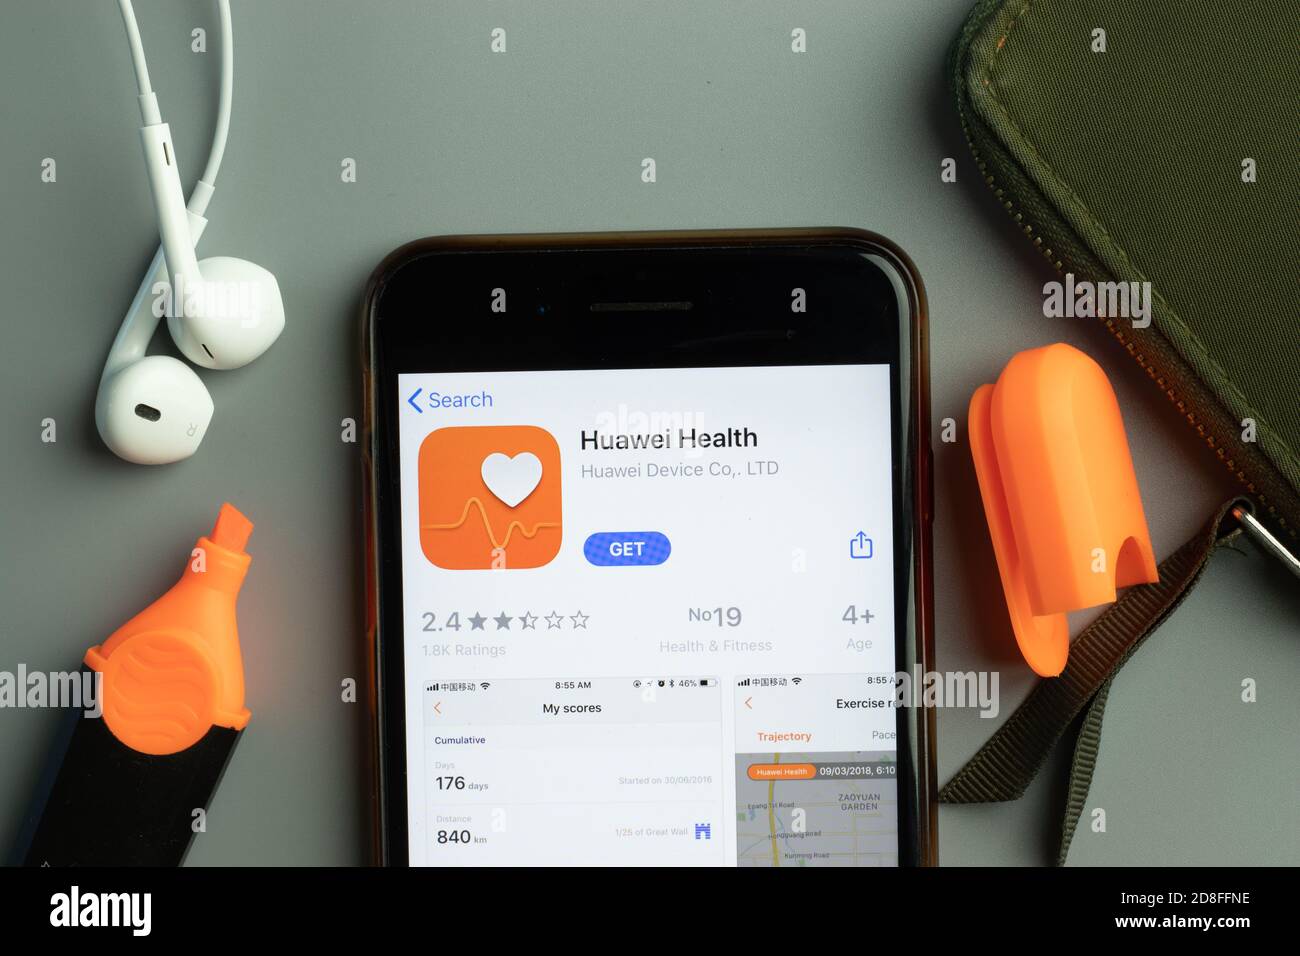 New York, USA - 26 October 2020: Huawei Health mobile app icon logo on phone screen close-up, Illustrative Editorial Stock Photo